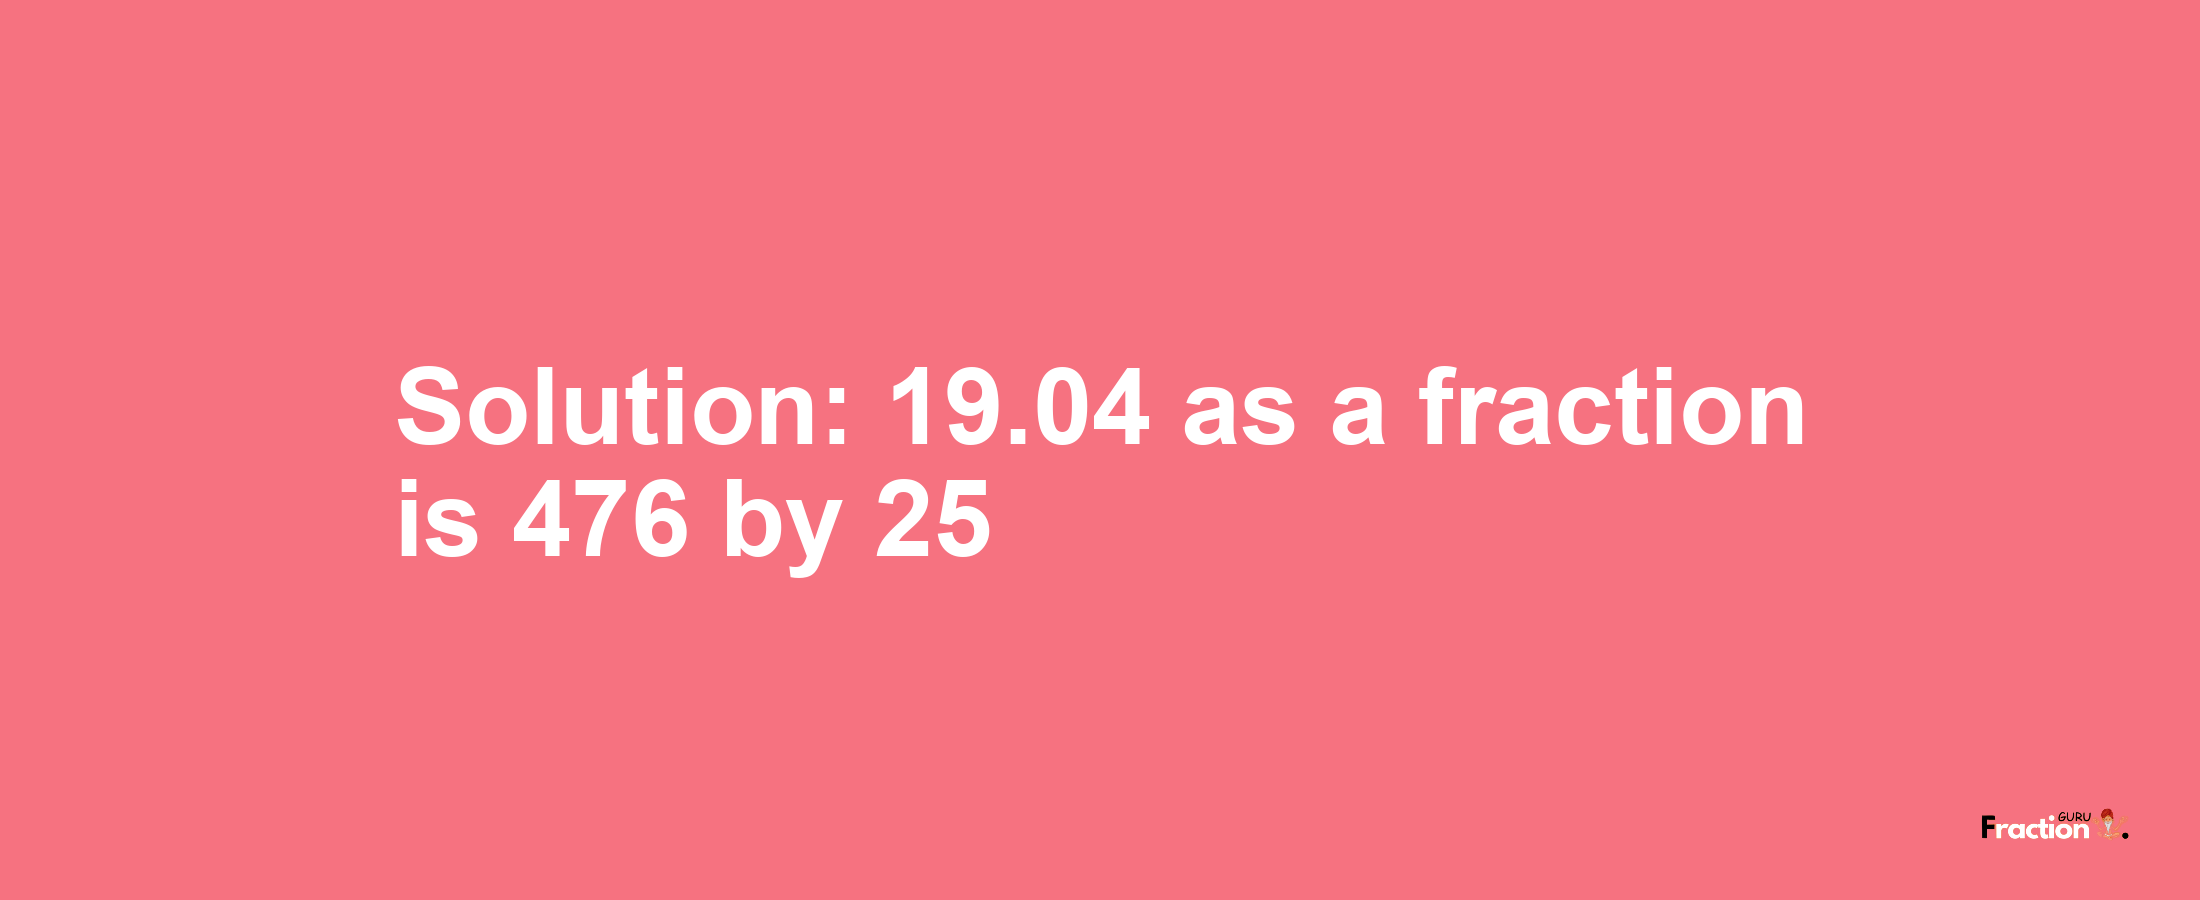 Solution:19.04 as a fraction is 476/25